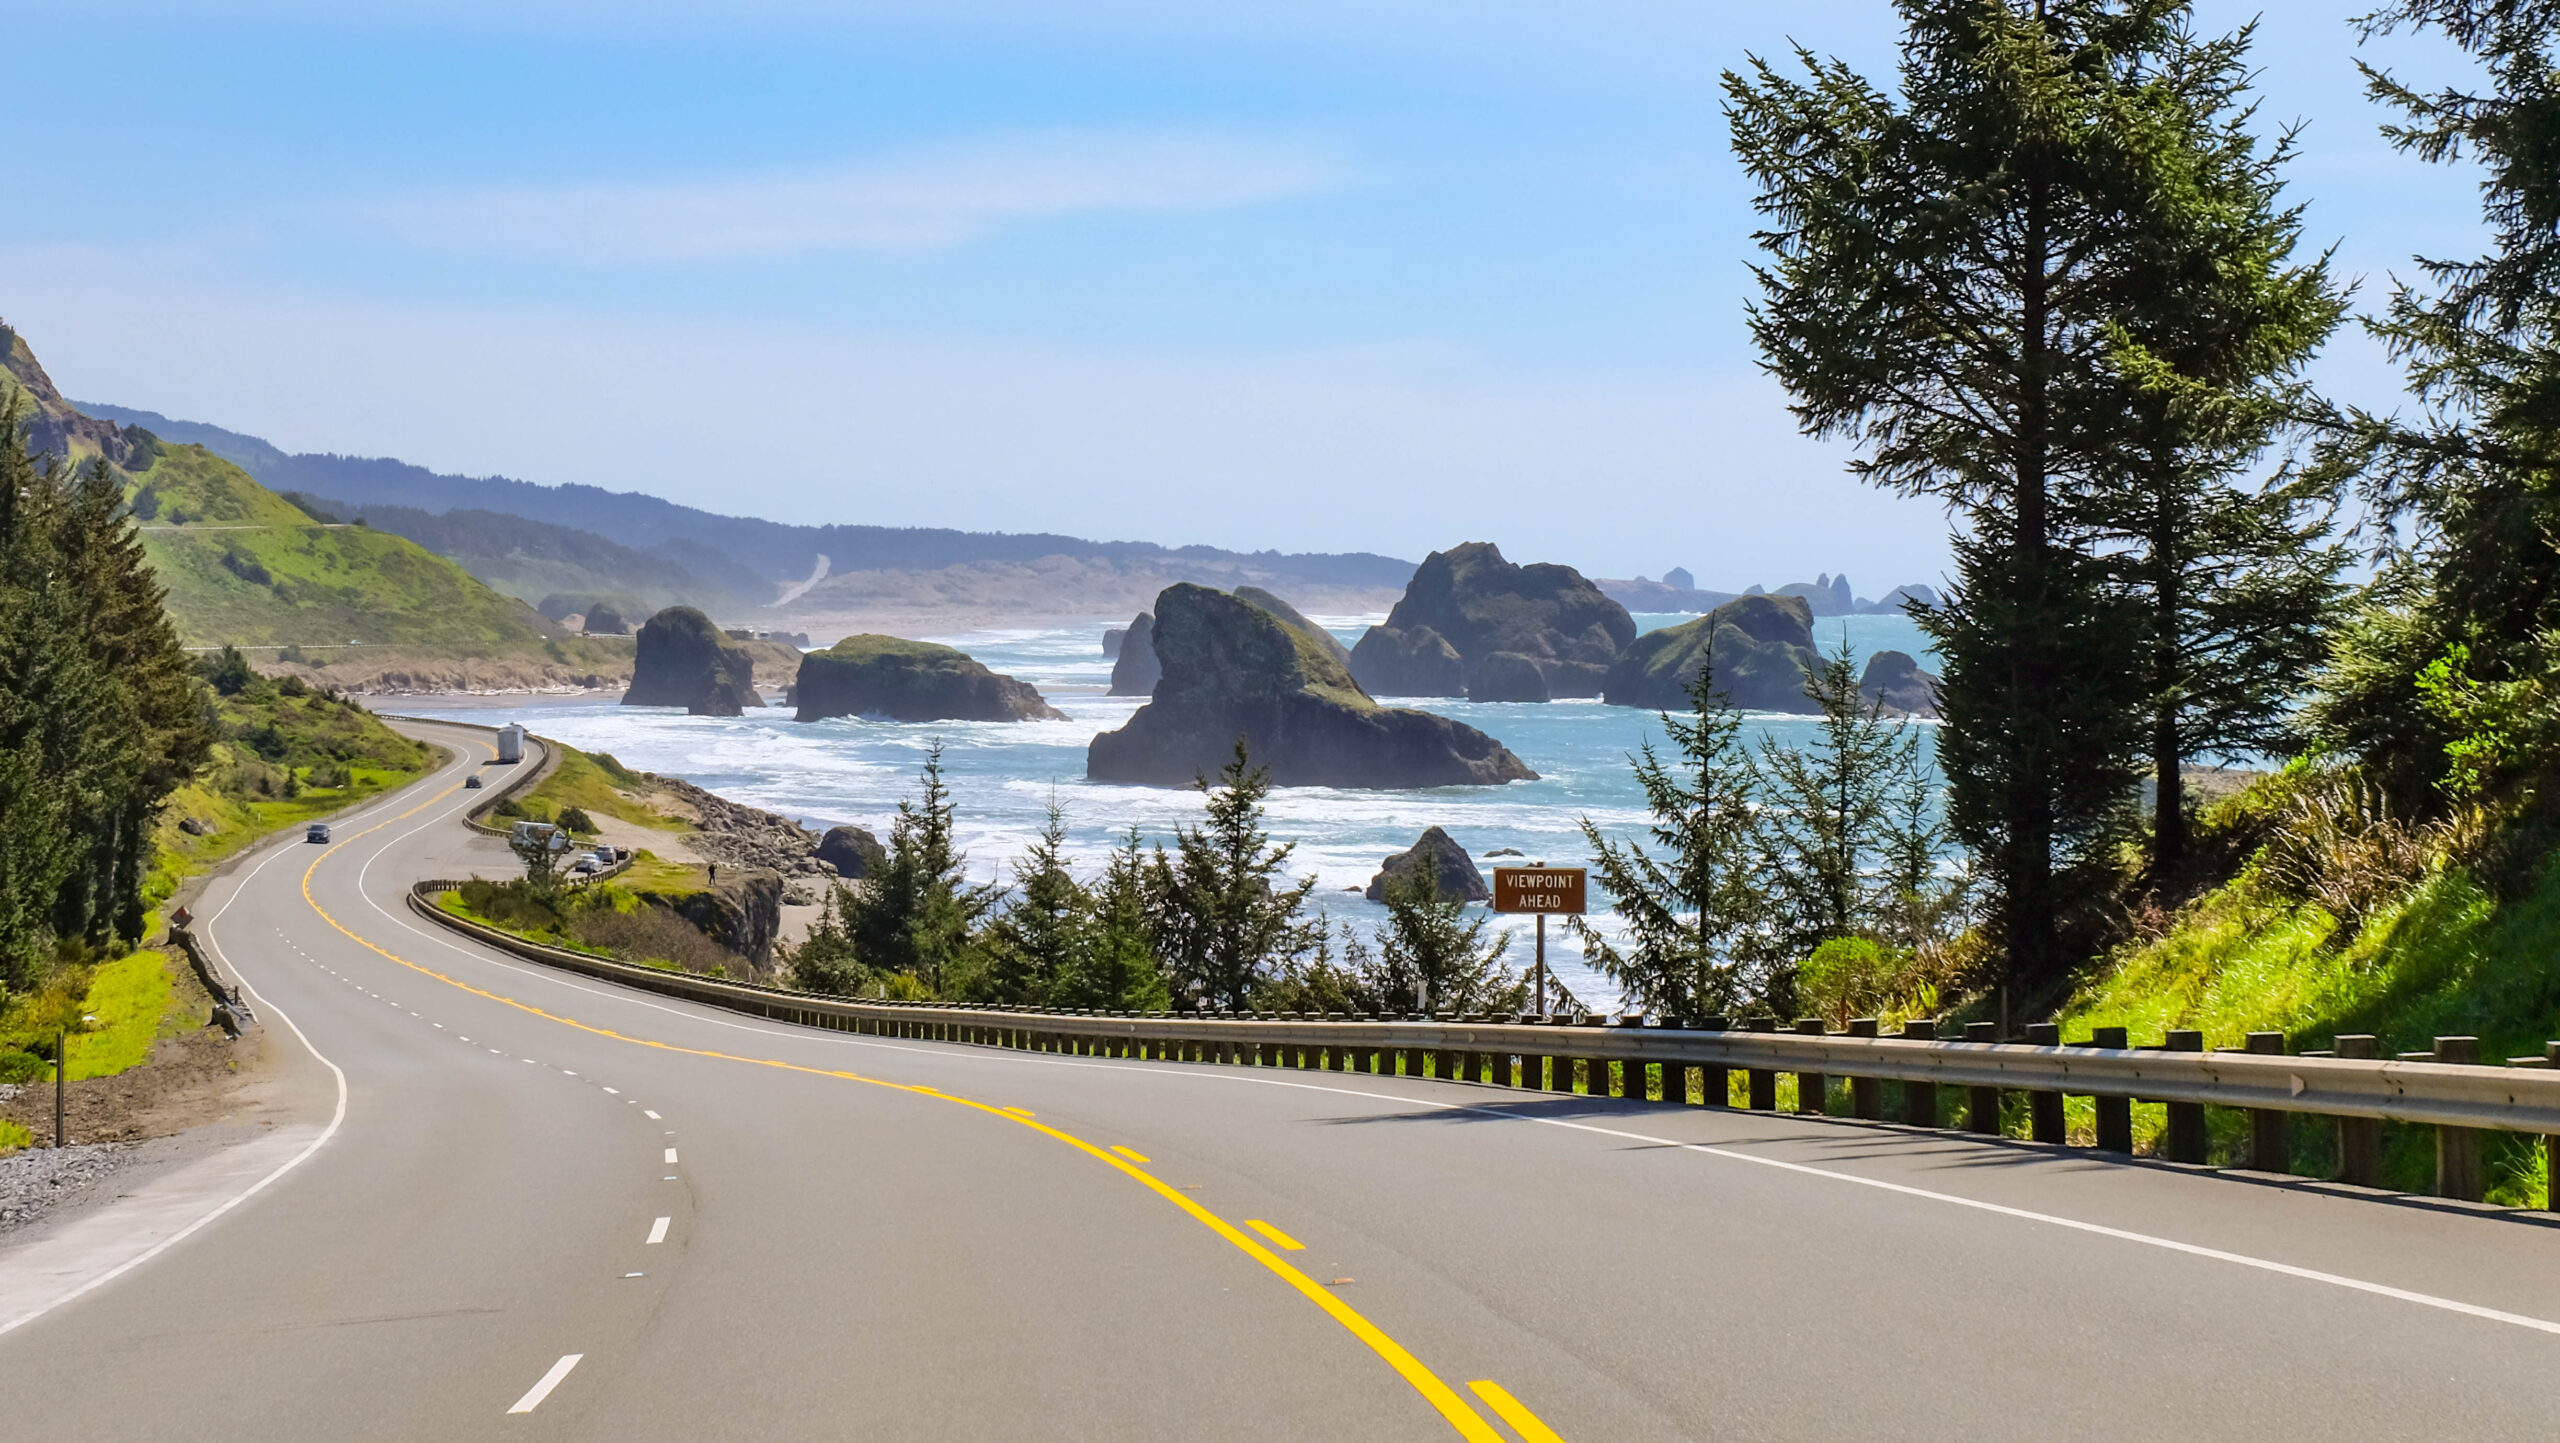 coastal oregon road trip with road to the left and ocean to the right of the photo